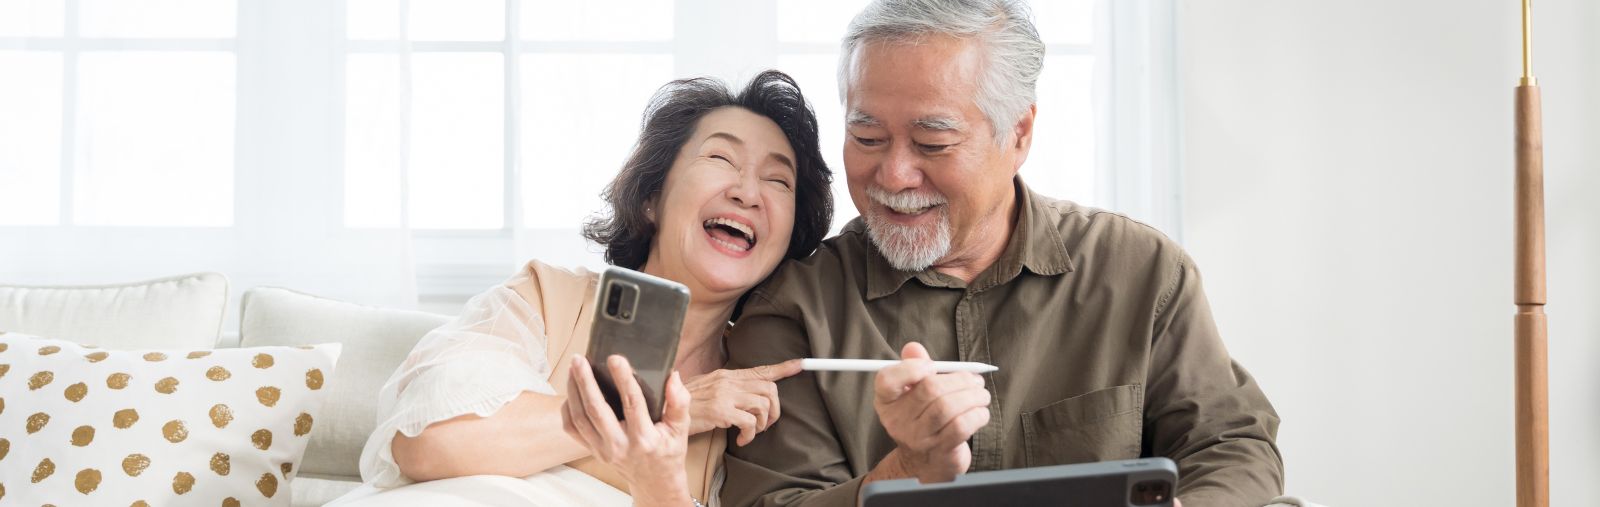 Two older adults of Asian descent laughing at a smartphone and tablet